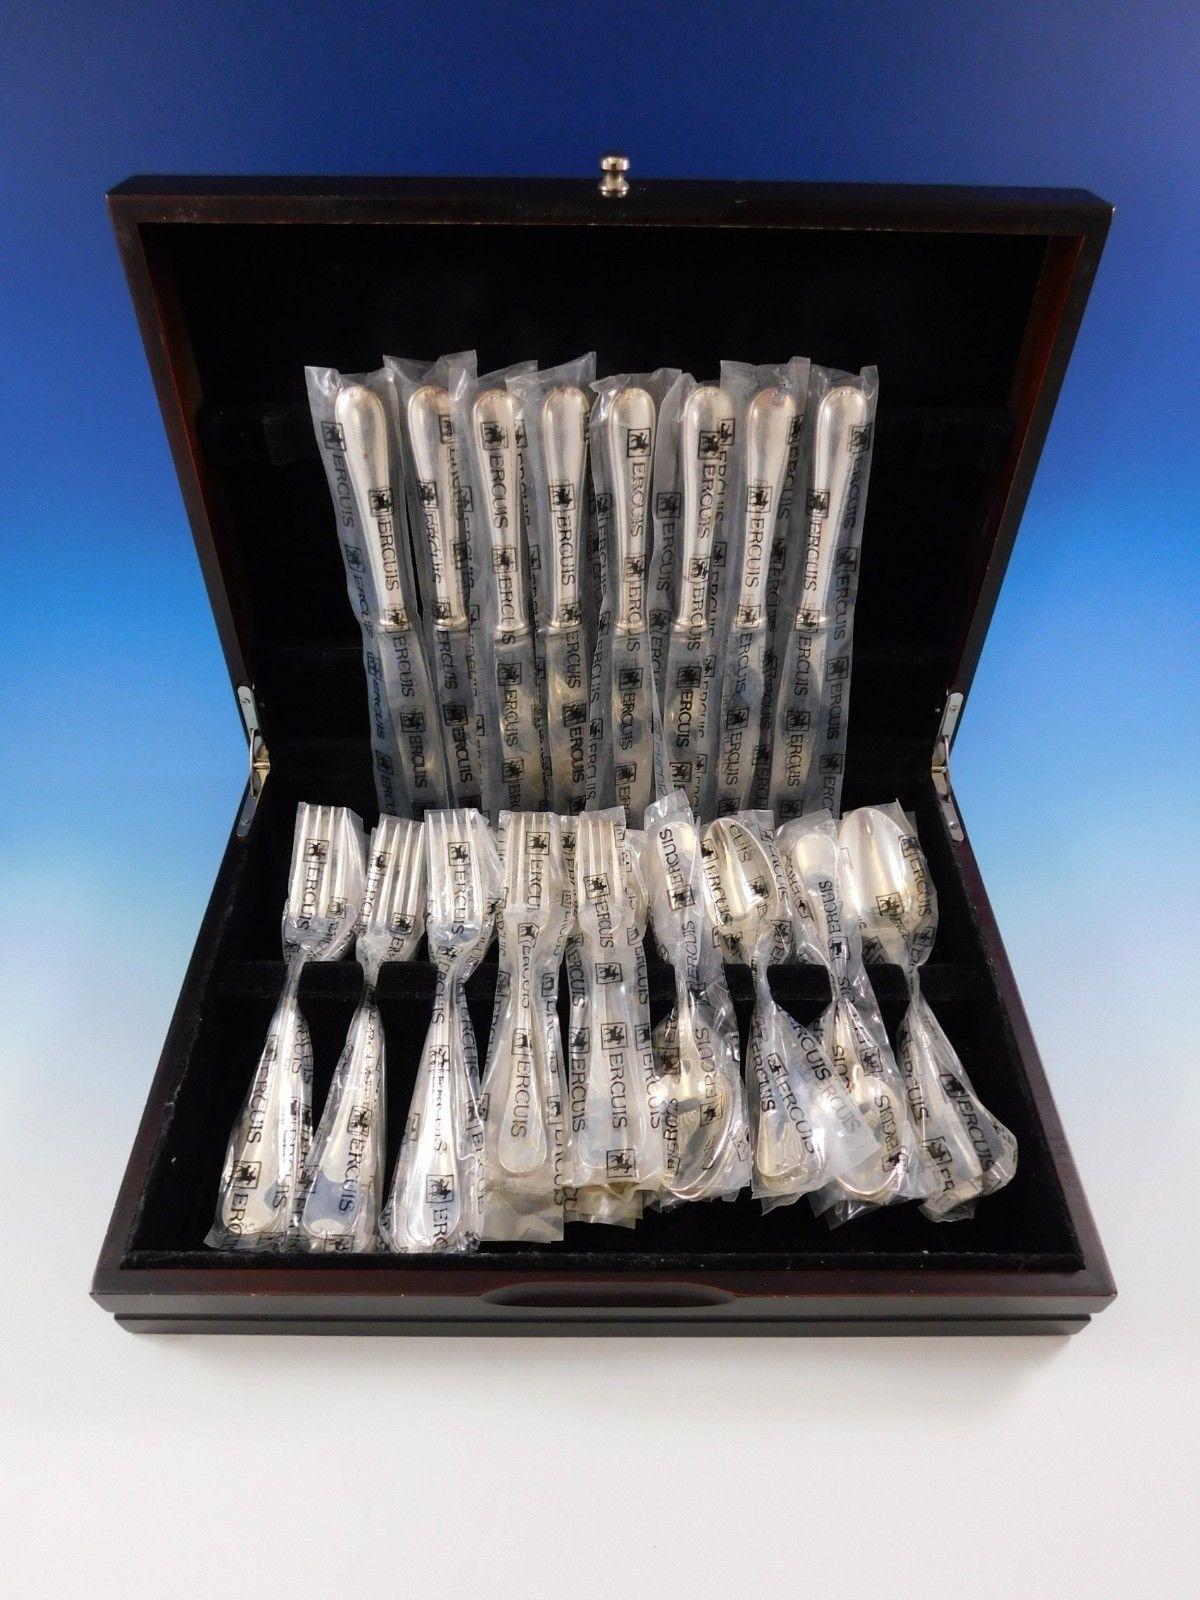 Elegant Dampierre by Ercuis French silverplate flatware set, new in factory sleeves, 34 pieces. This set includes:

8 dinner knives, 10